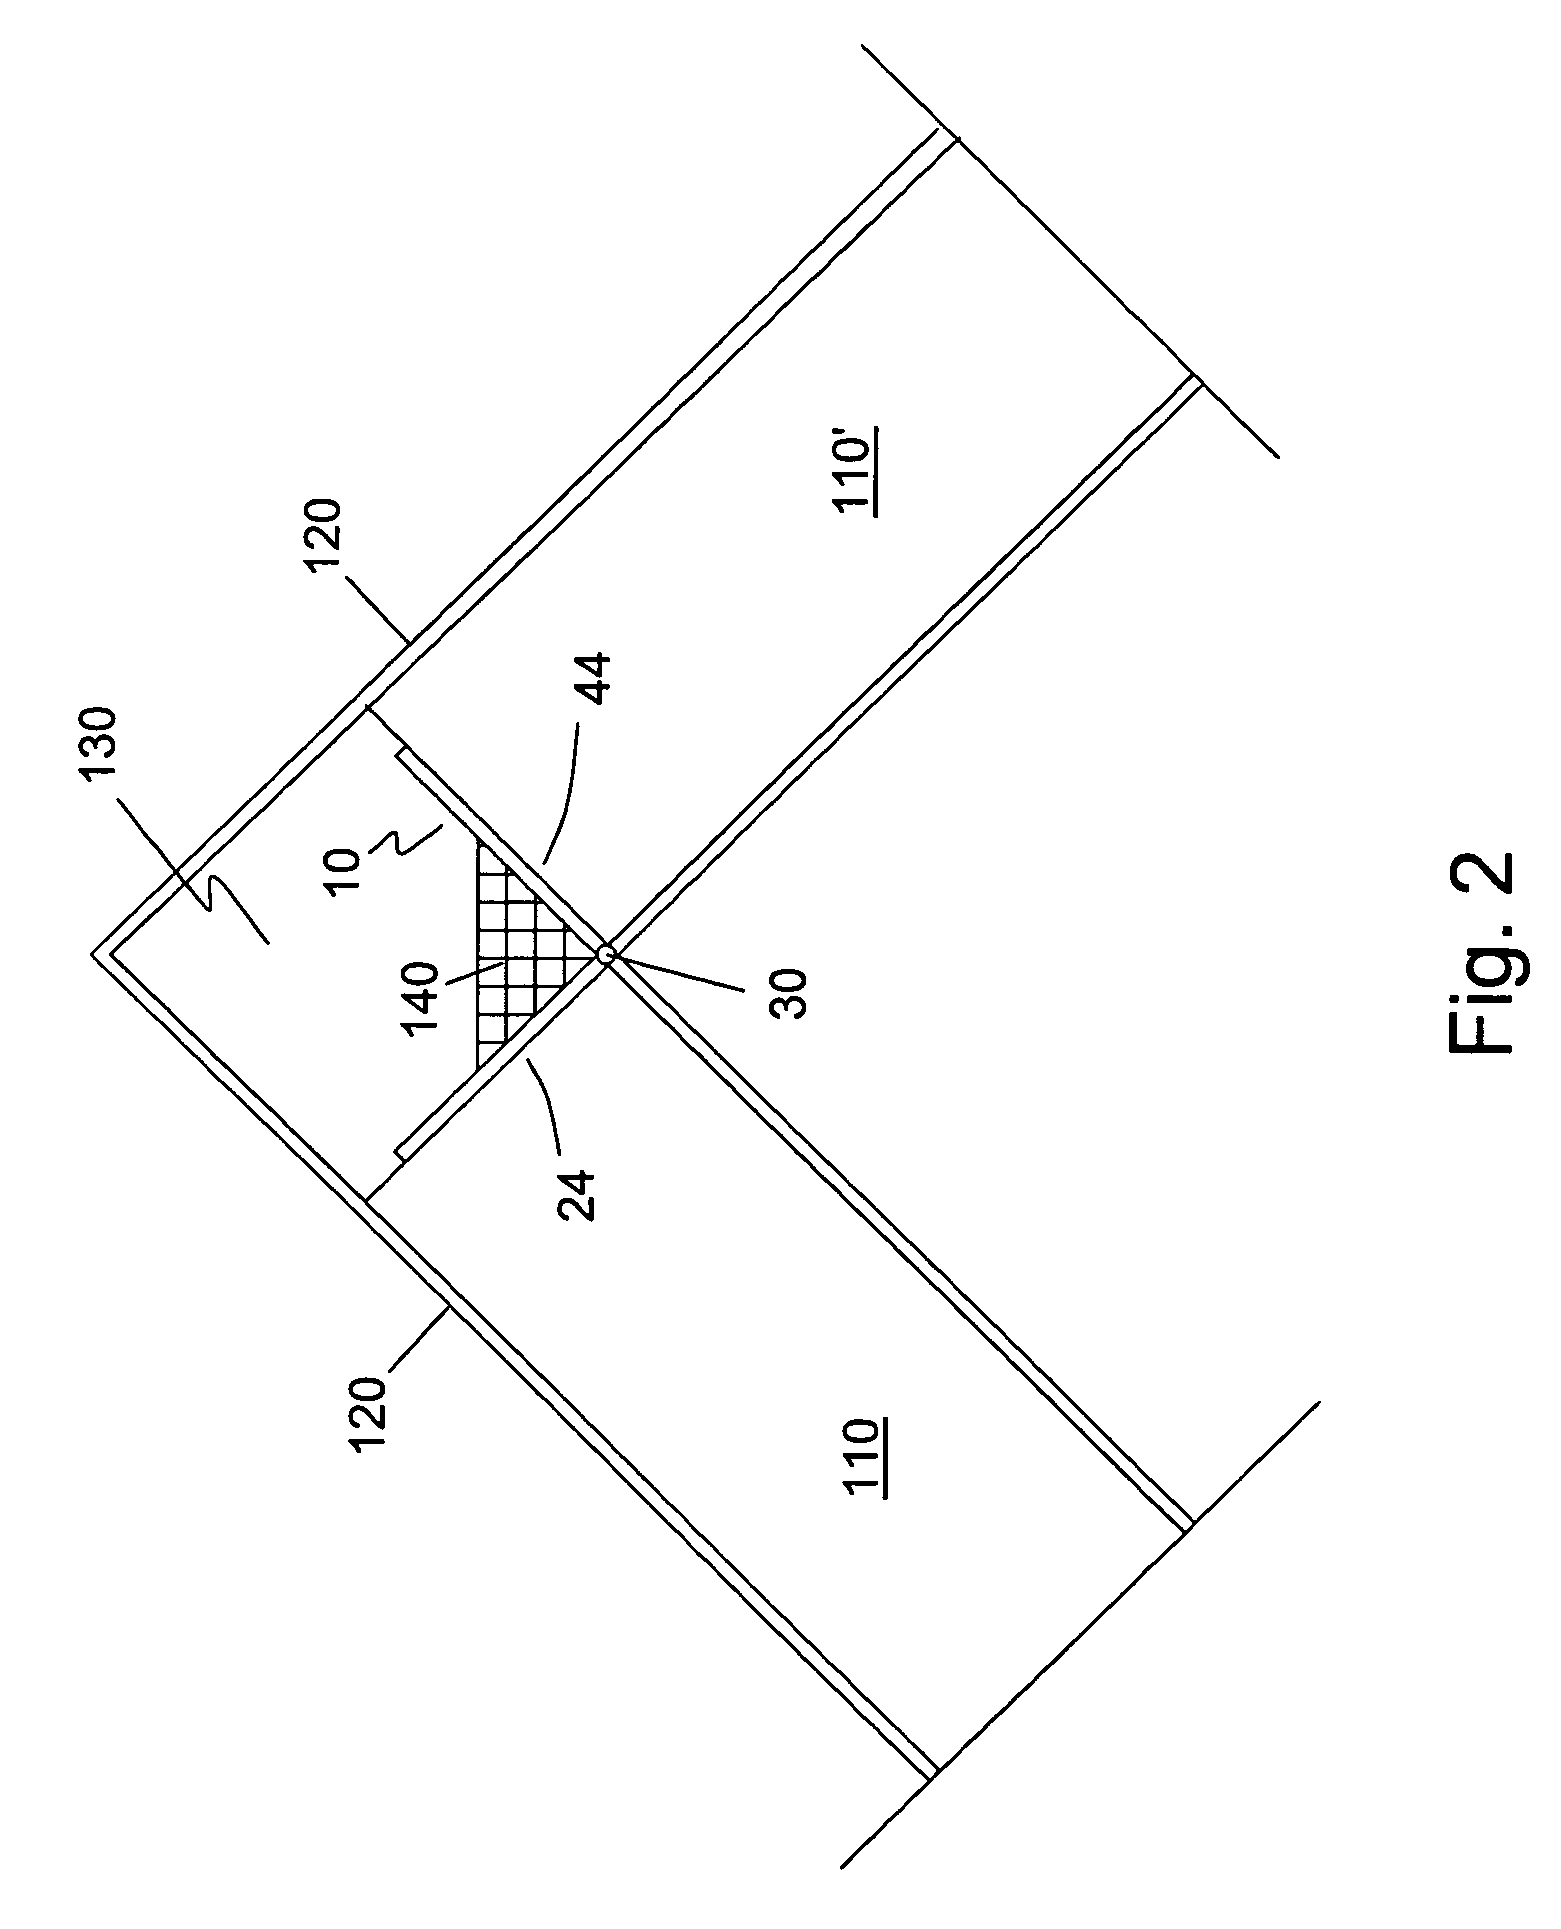 Construction bracket for creating a longitudinal roof venting space